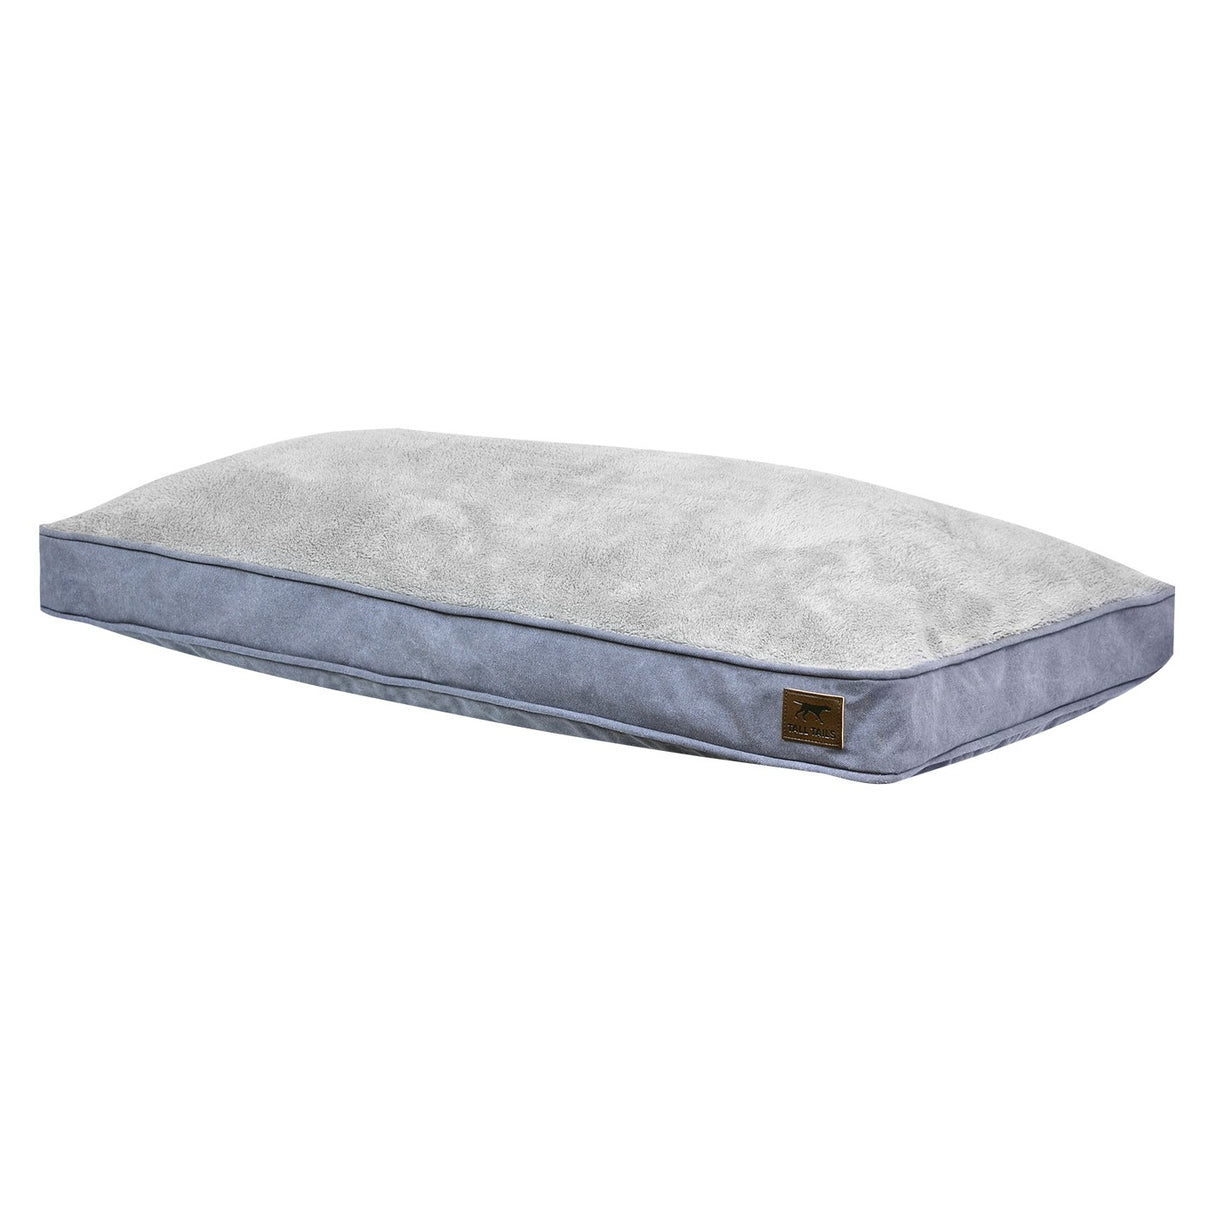 Tall Tails Charcoal Cushion Bed